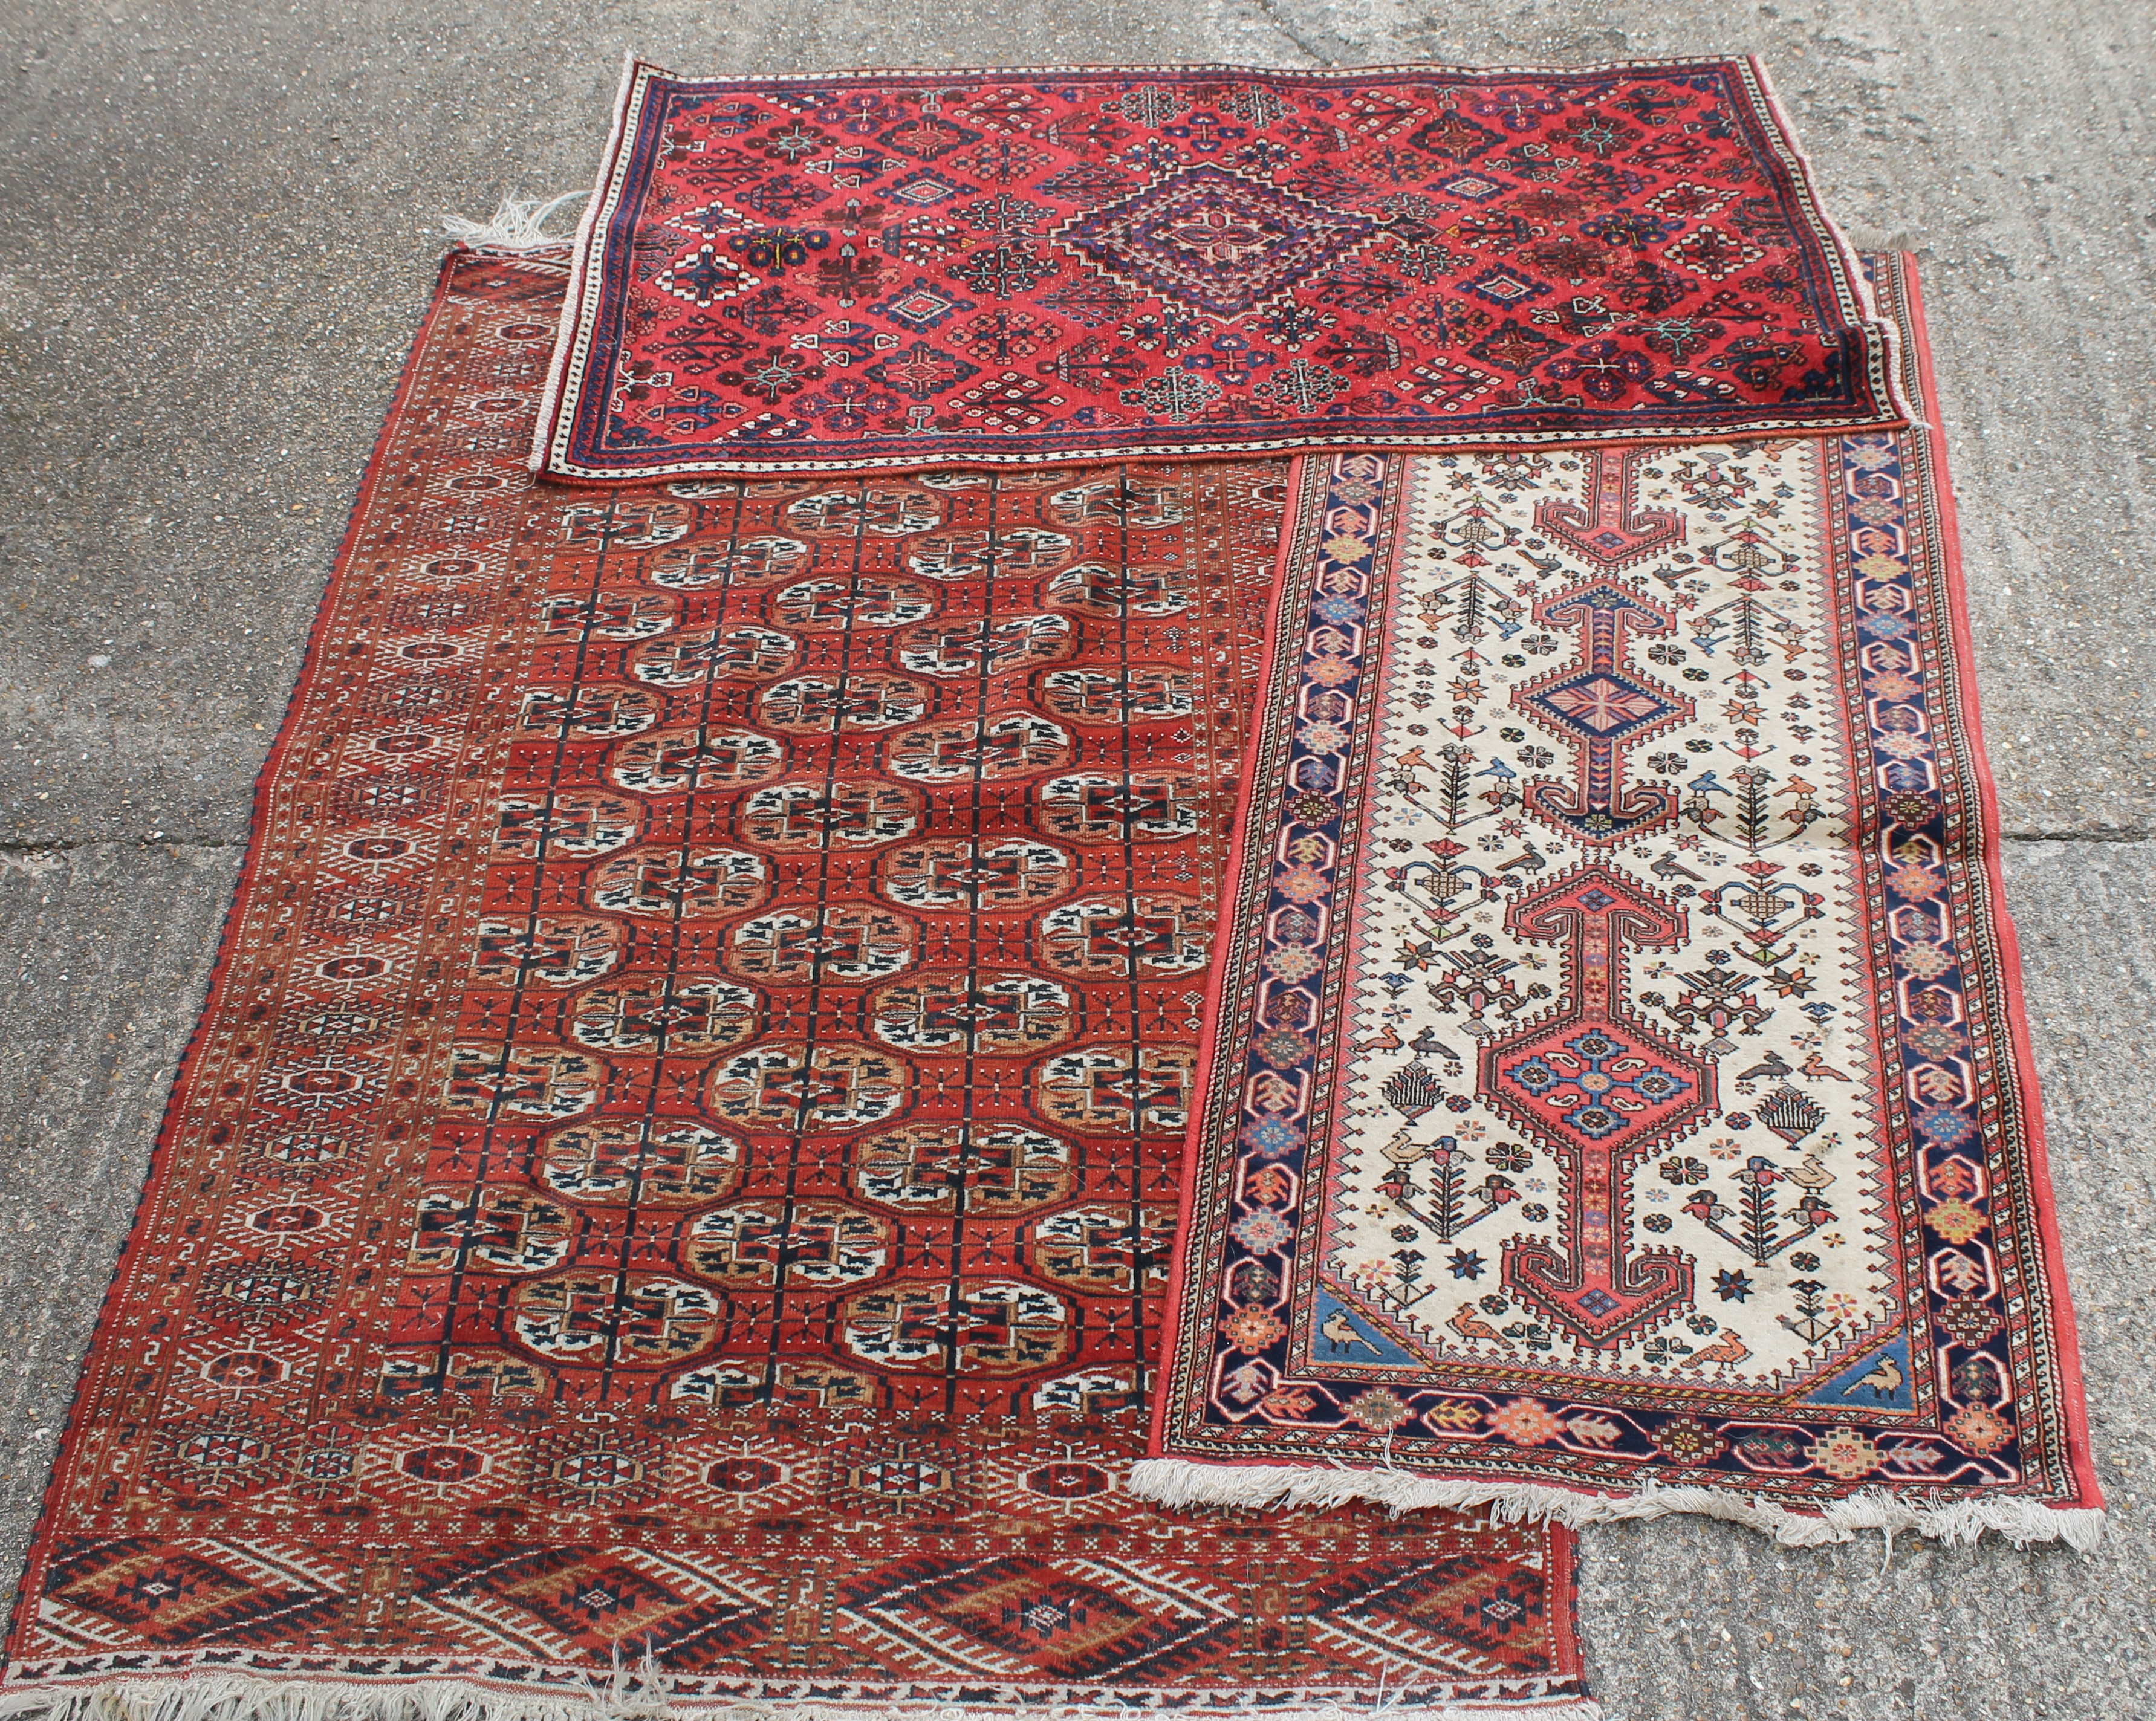 Three Persian wool rugs. The largest 131 x 205 cm.